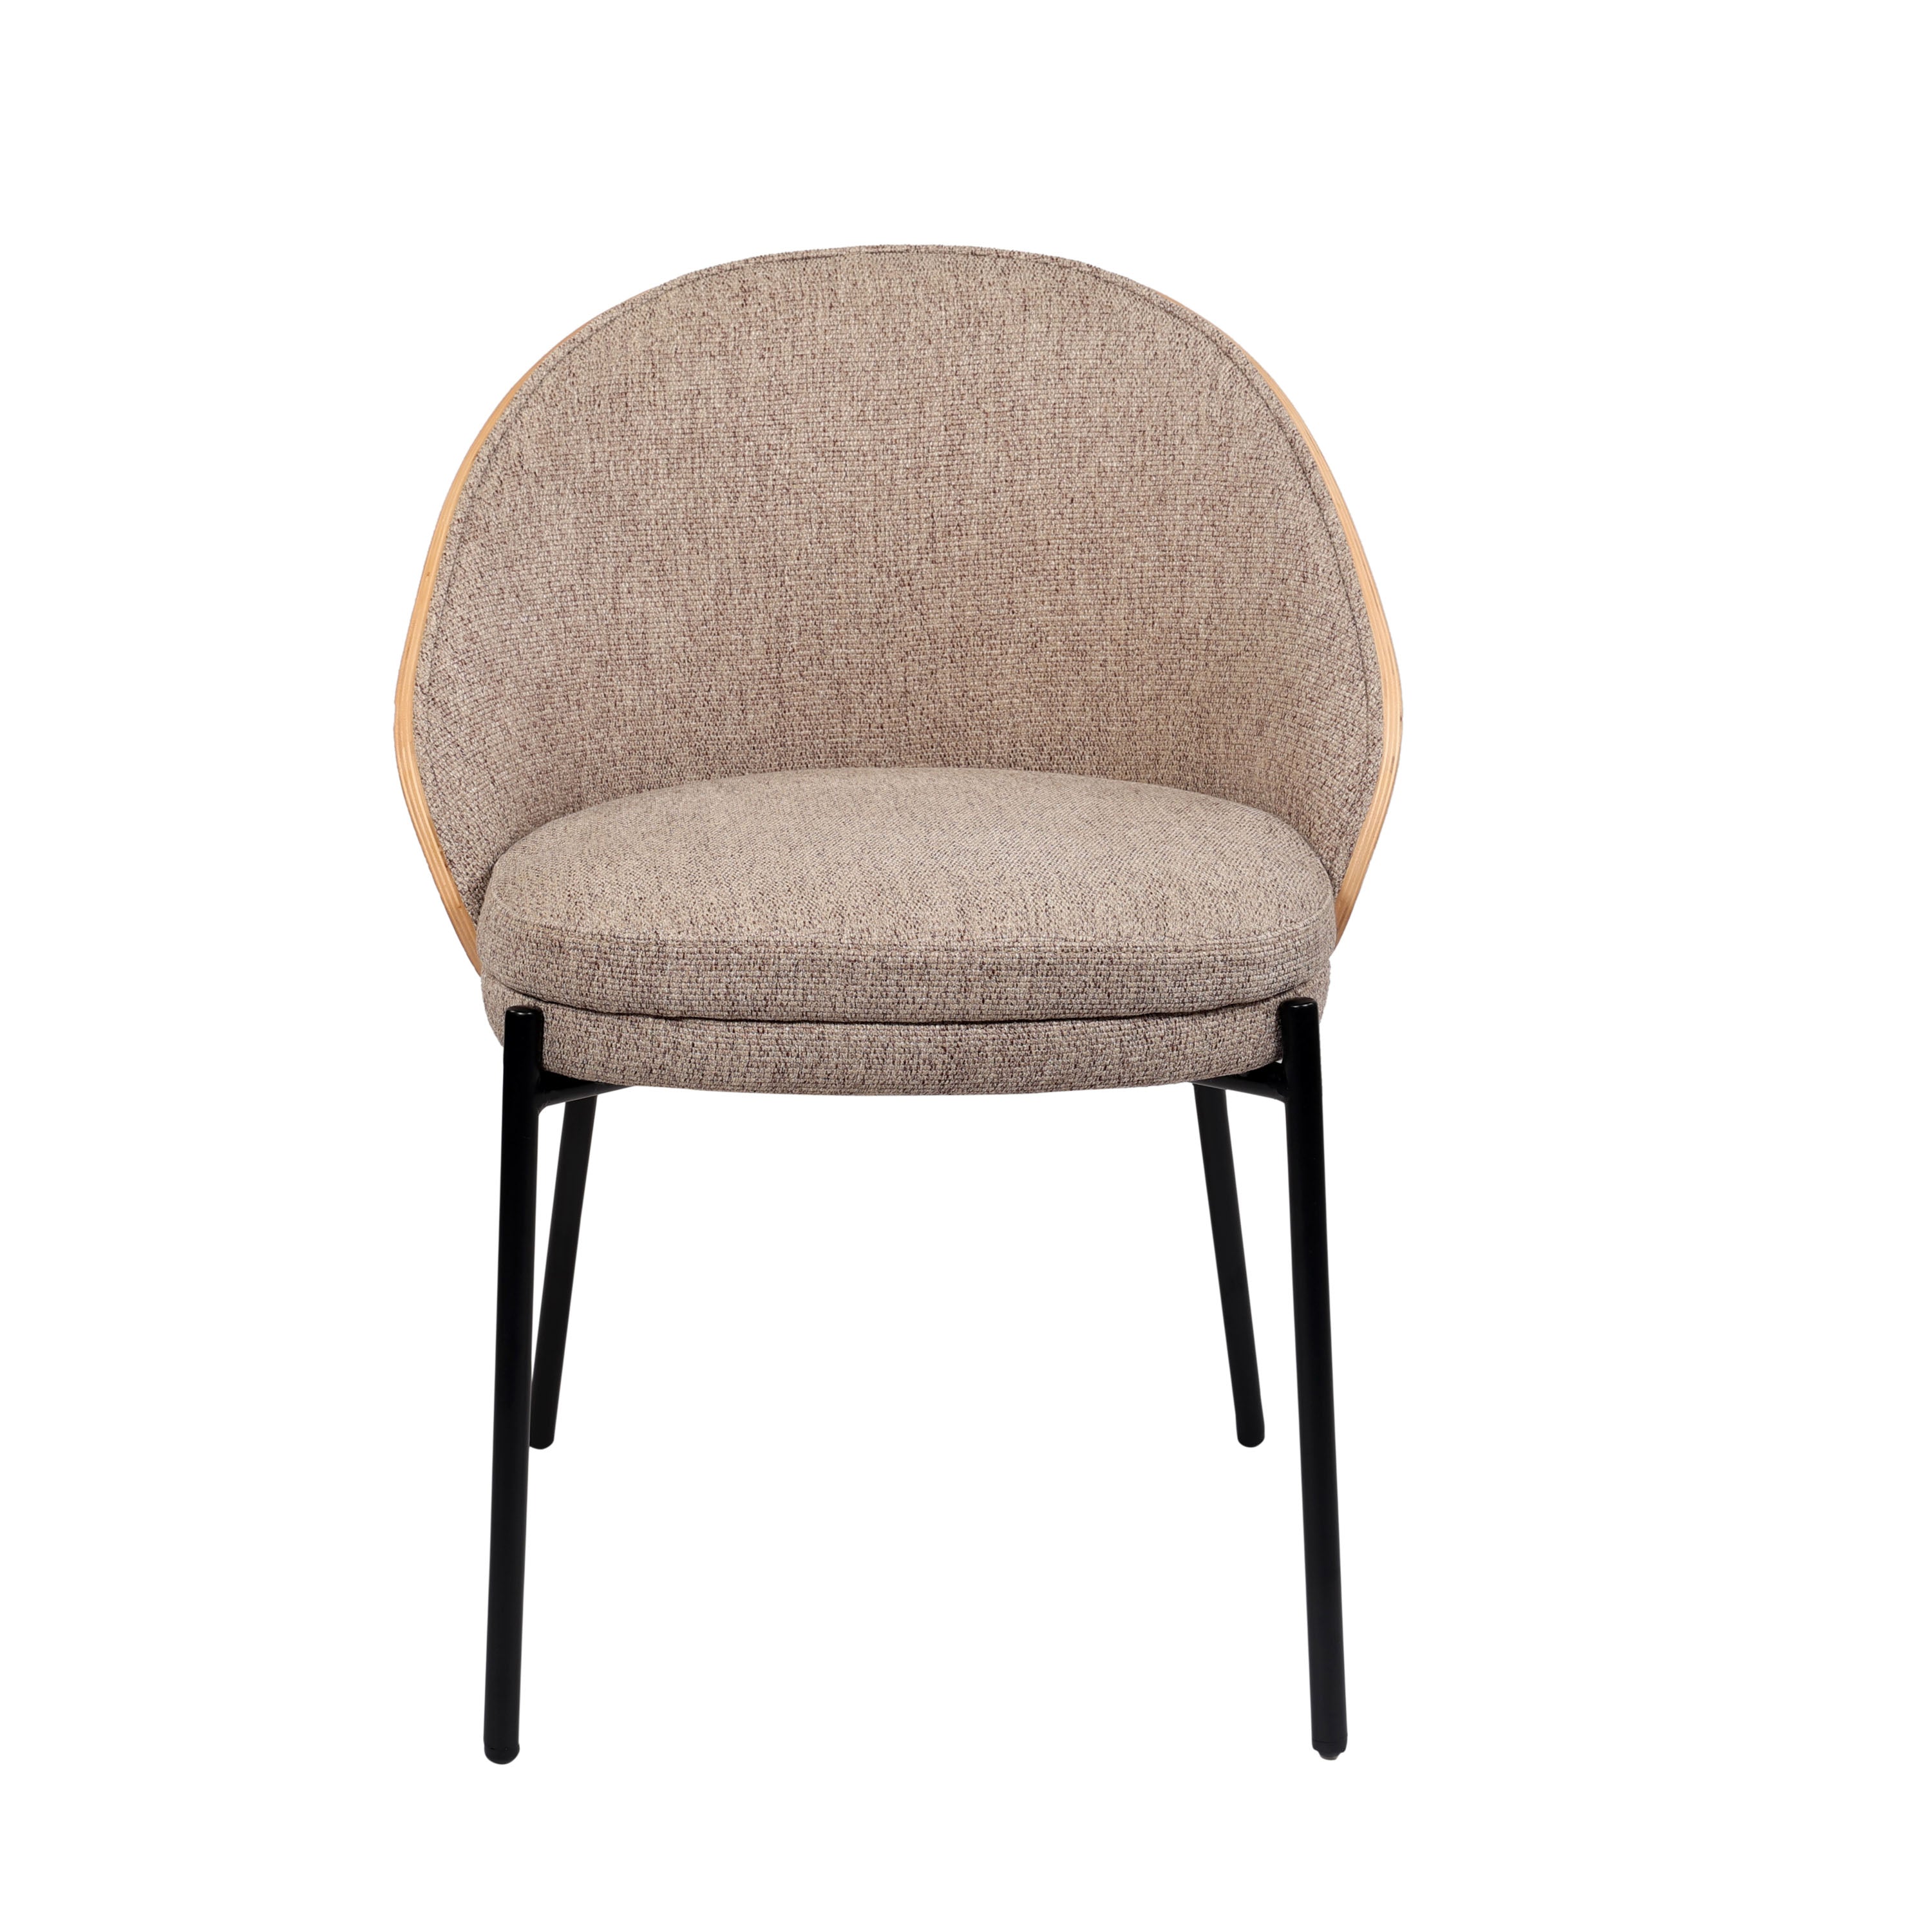 Hanoi Modern Fabric Upholstered Chair With Metal Legs - Beige